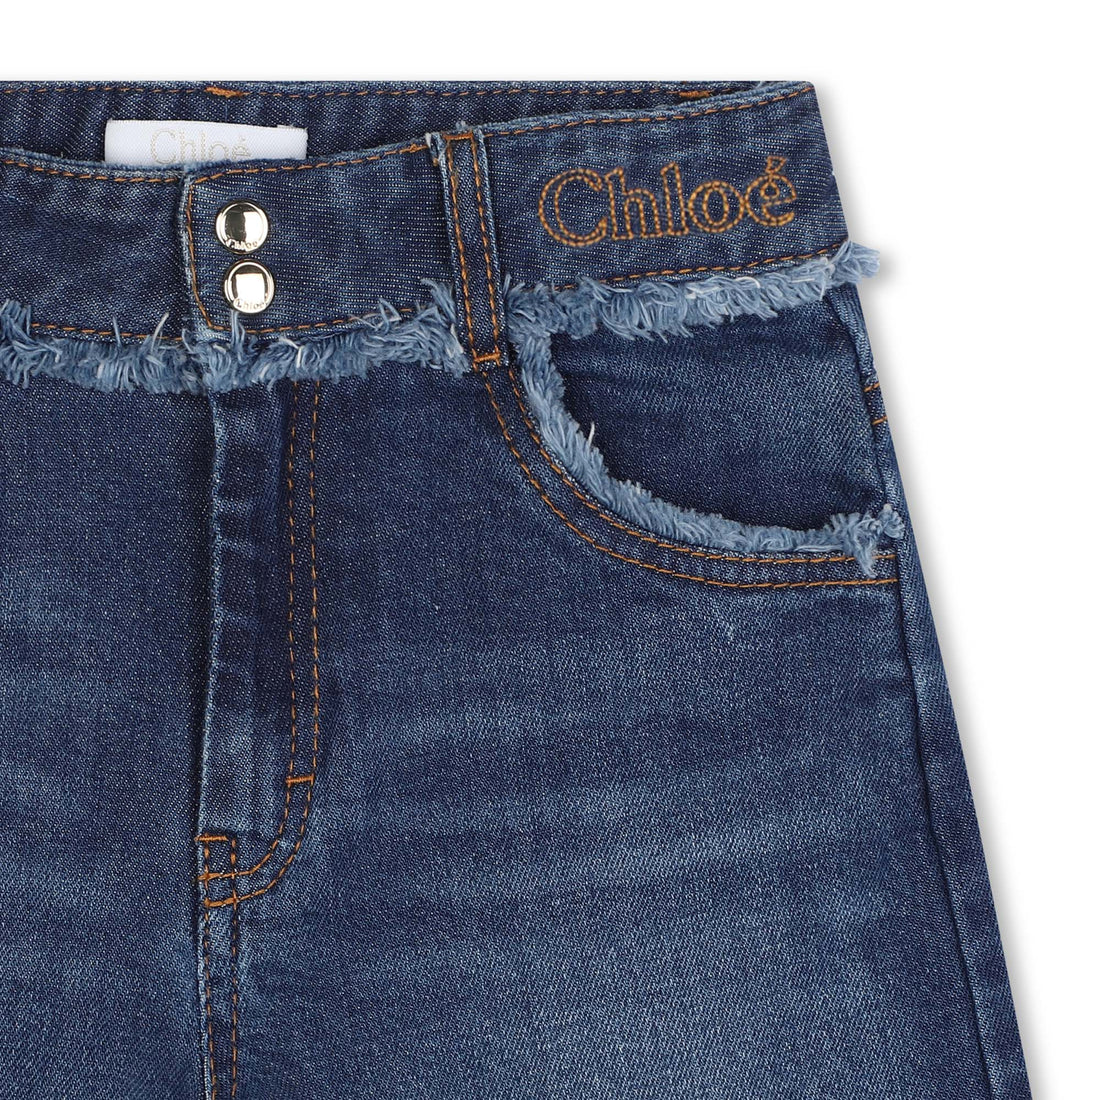 Chloe Denim Shorts - Comfortable and Stylish for Kids | Schools Out